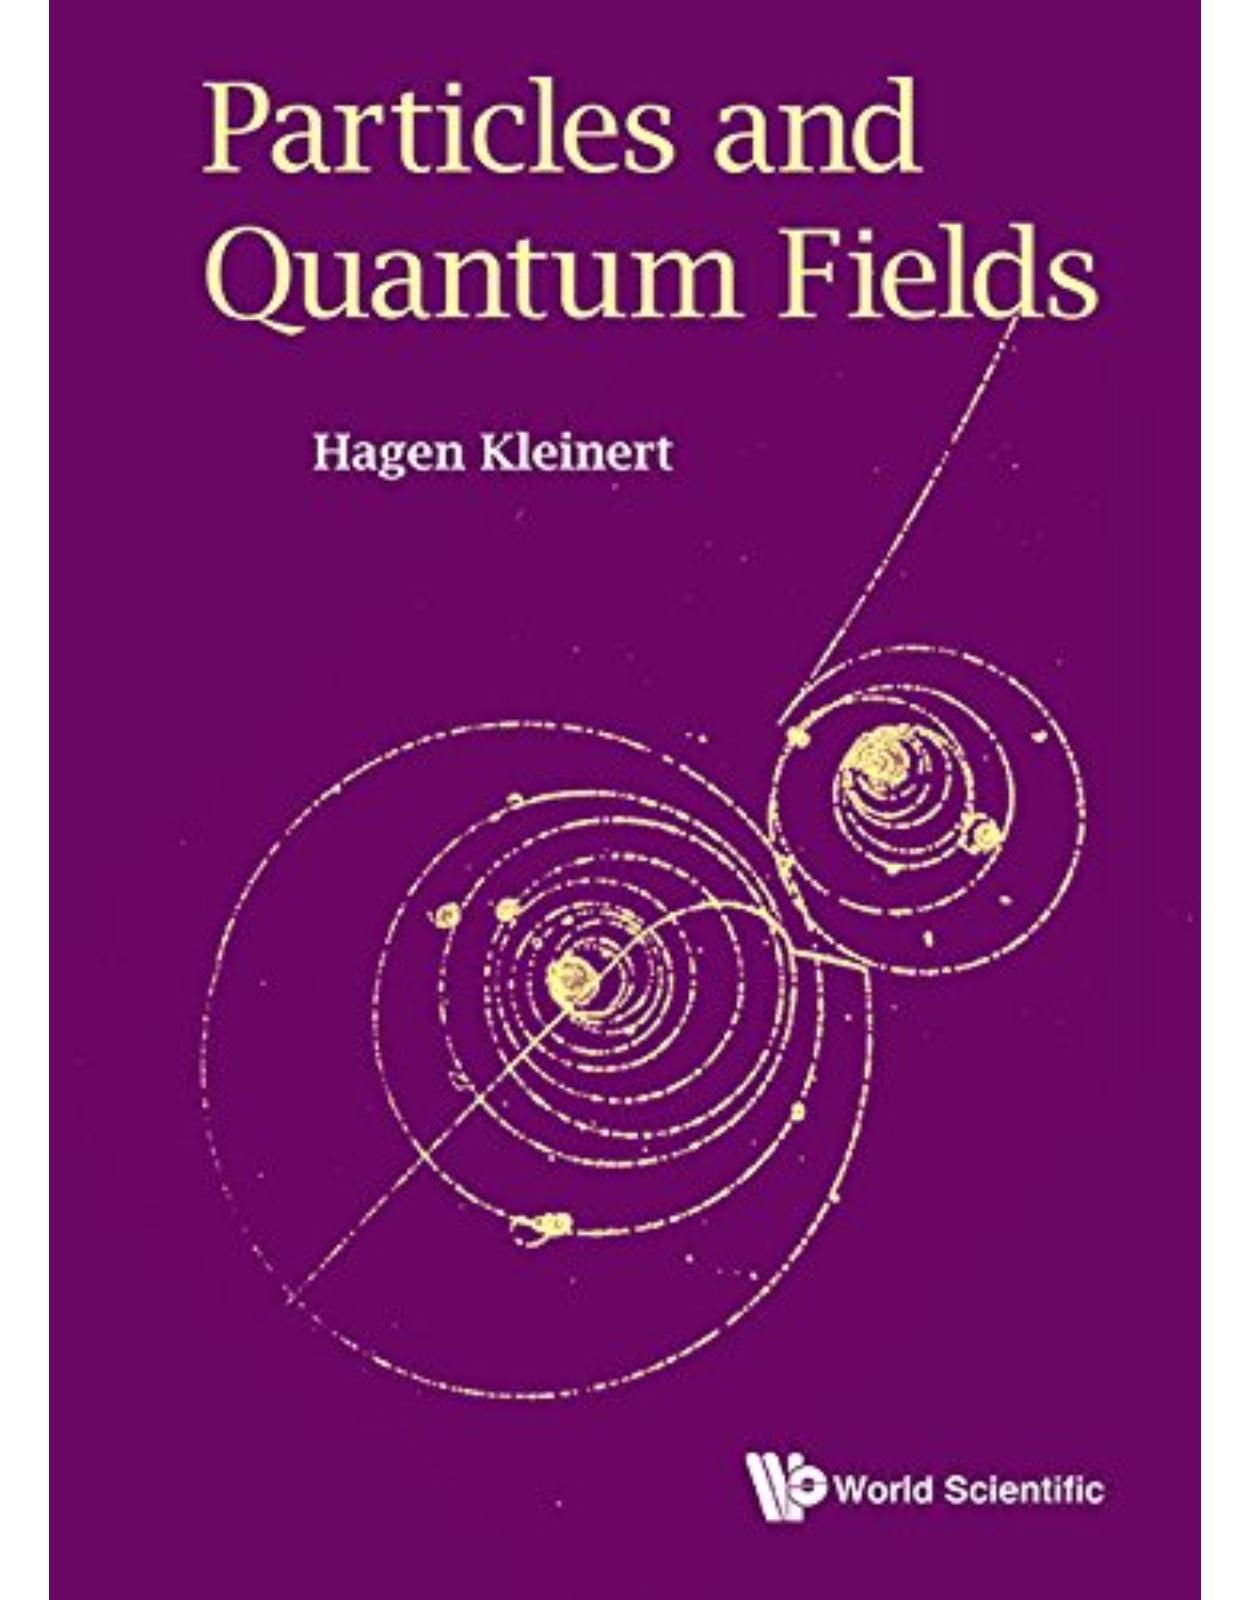 Particles and Quantum Fields